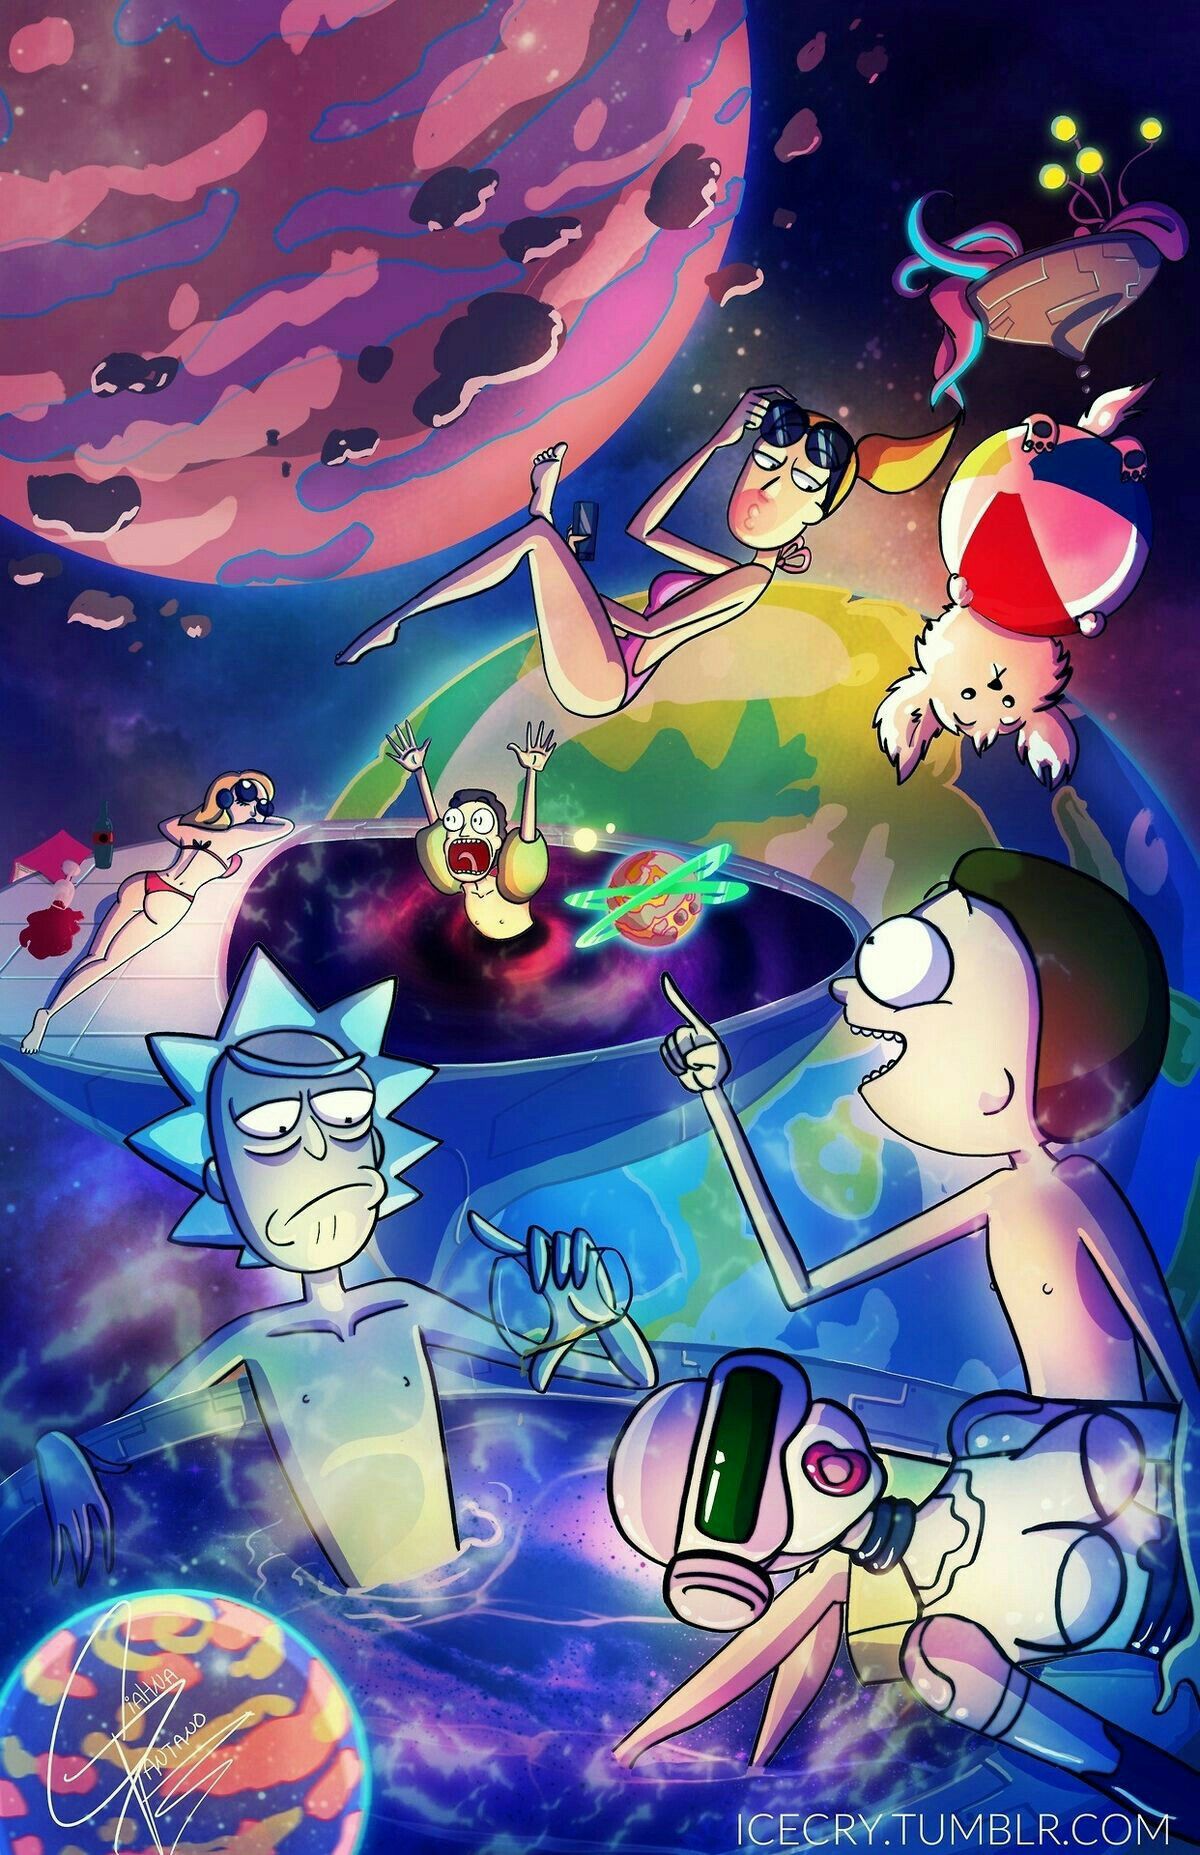 iPhone wallpaper Rick and Morty ideas. rick and morty, morty, rick and morty poster